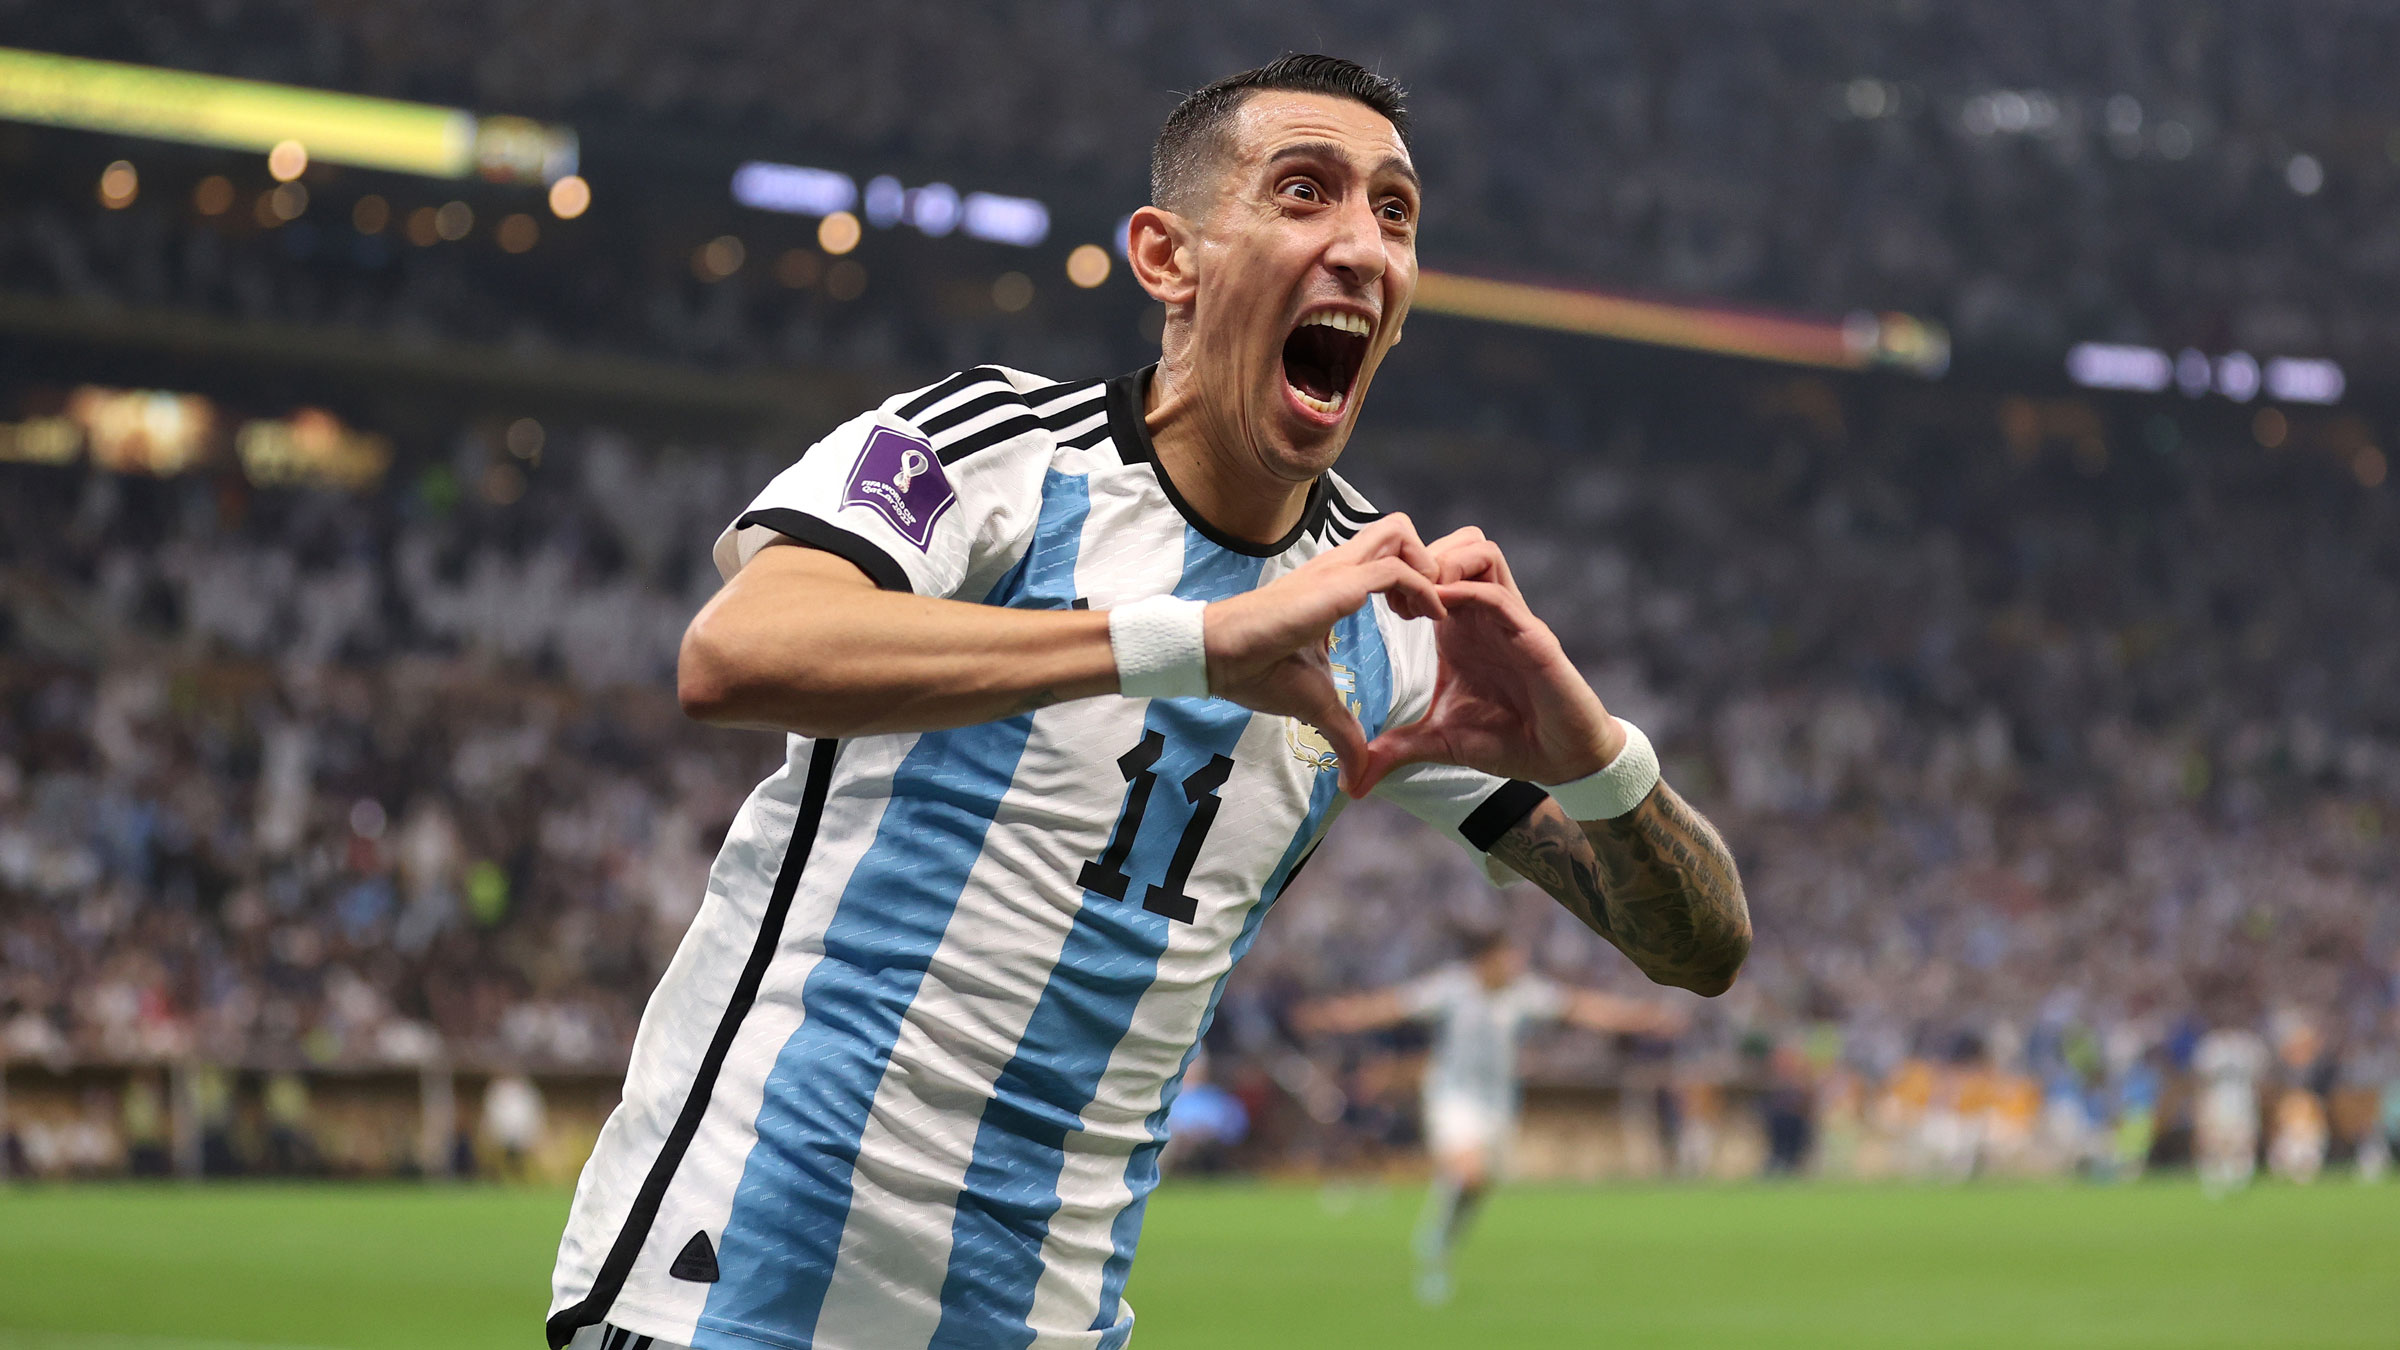 Angel Di Maria celebrates after scoring Argentina's second goal on Sunday.